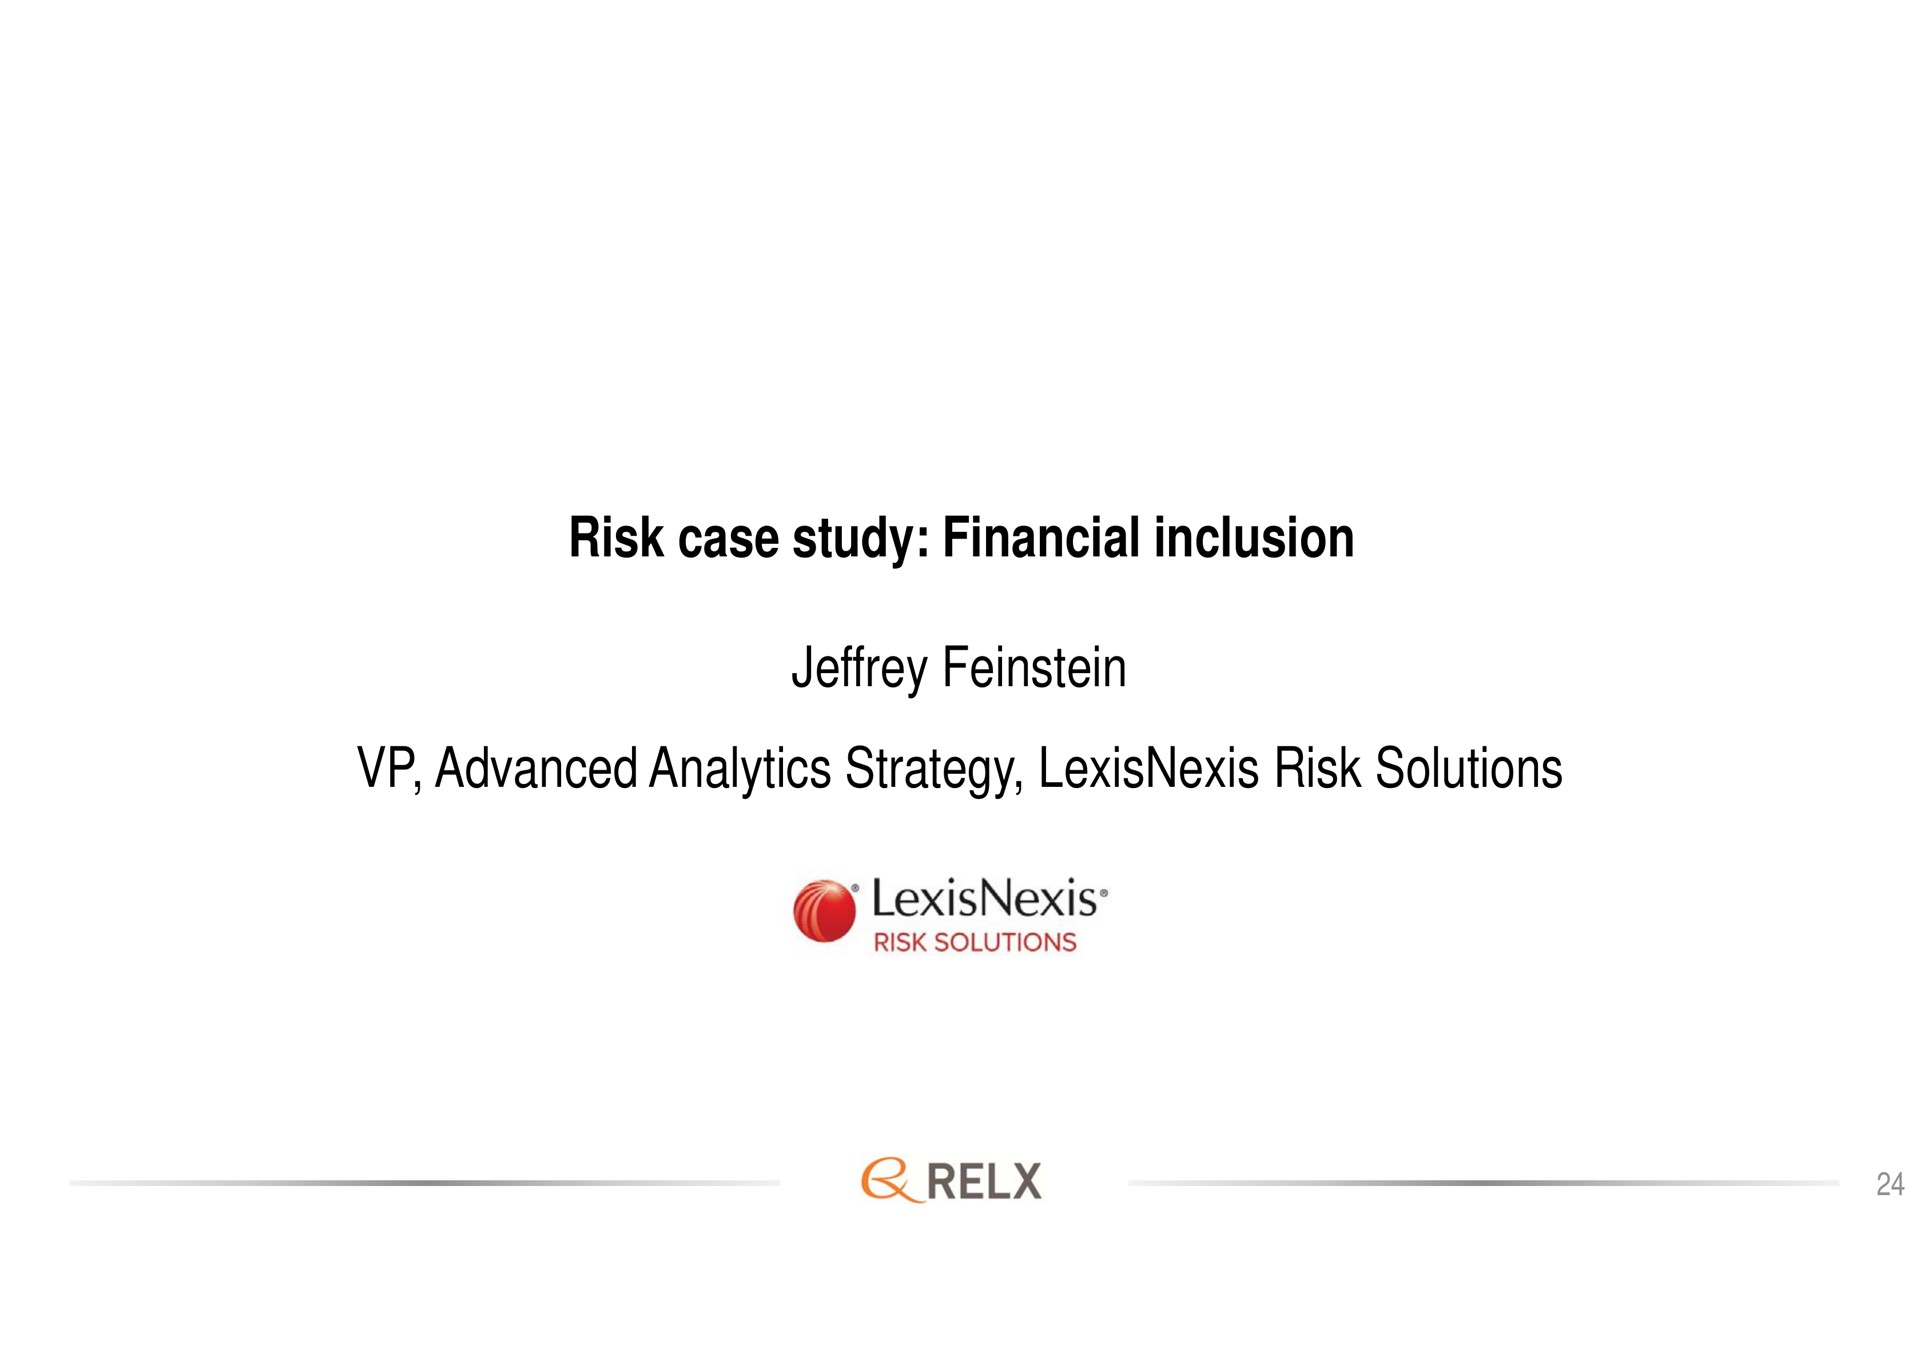 risk case study financial inclusion advanced analytics strategy risk solutions | RELX